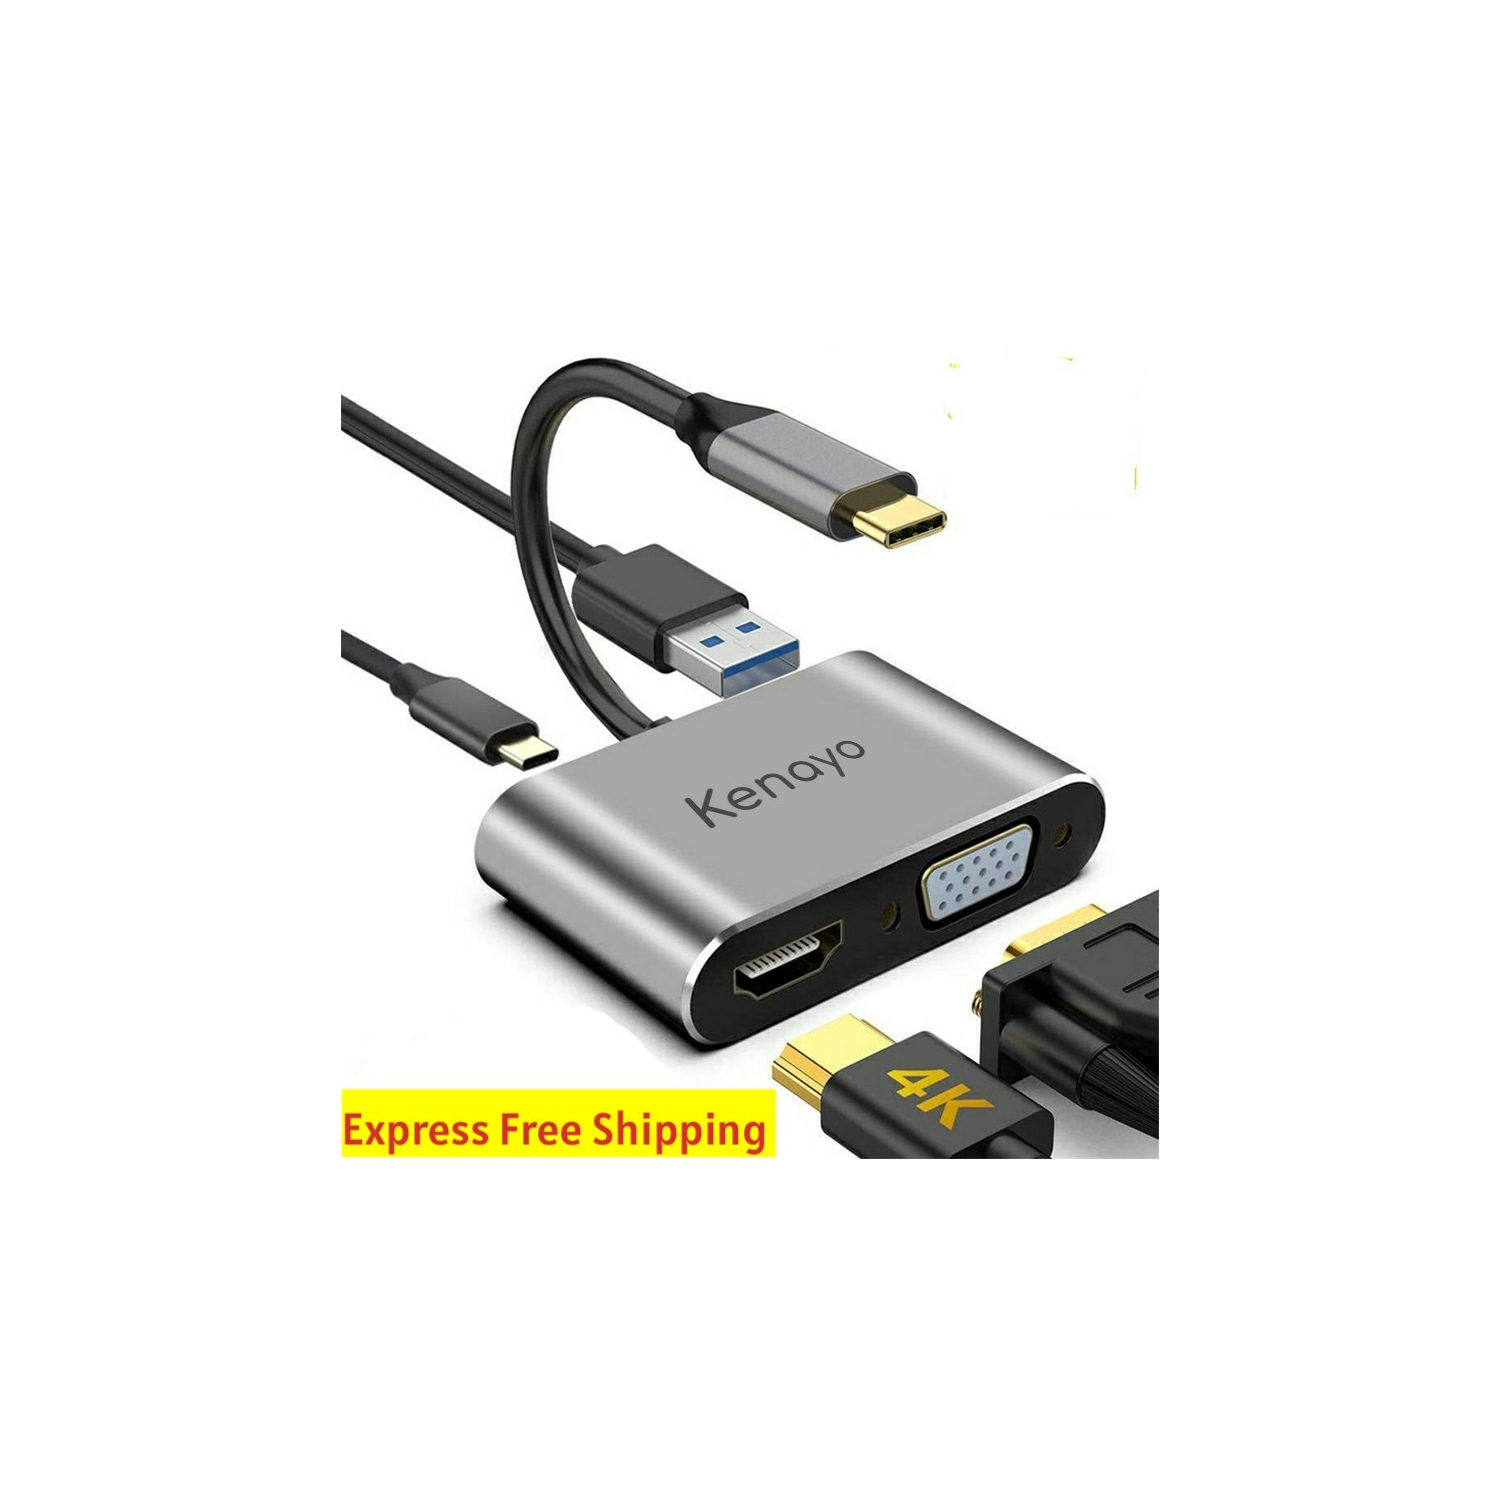 USB C to VGA HDMI 4 in 1 Hub PD, 4K HDMI, VGA, and USB 3.0 Thunderbolt 3 Compatible with MacBook Pro/iPad Pro18/ Samsung Galaxy S8 to S22, Surface Pro 7,Dell XPS 13/15